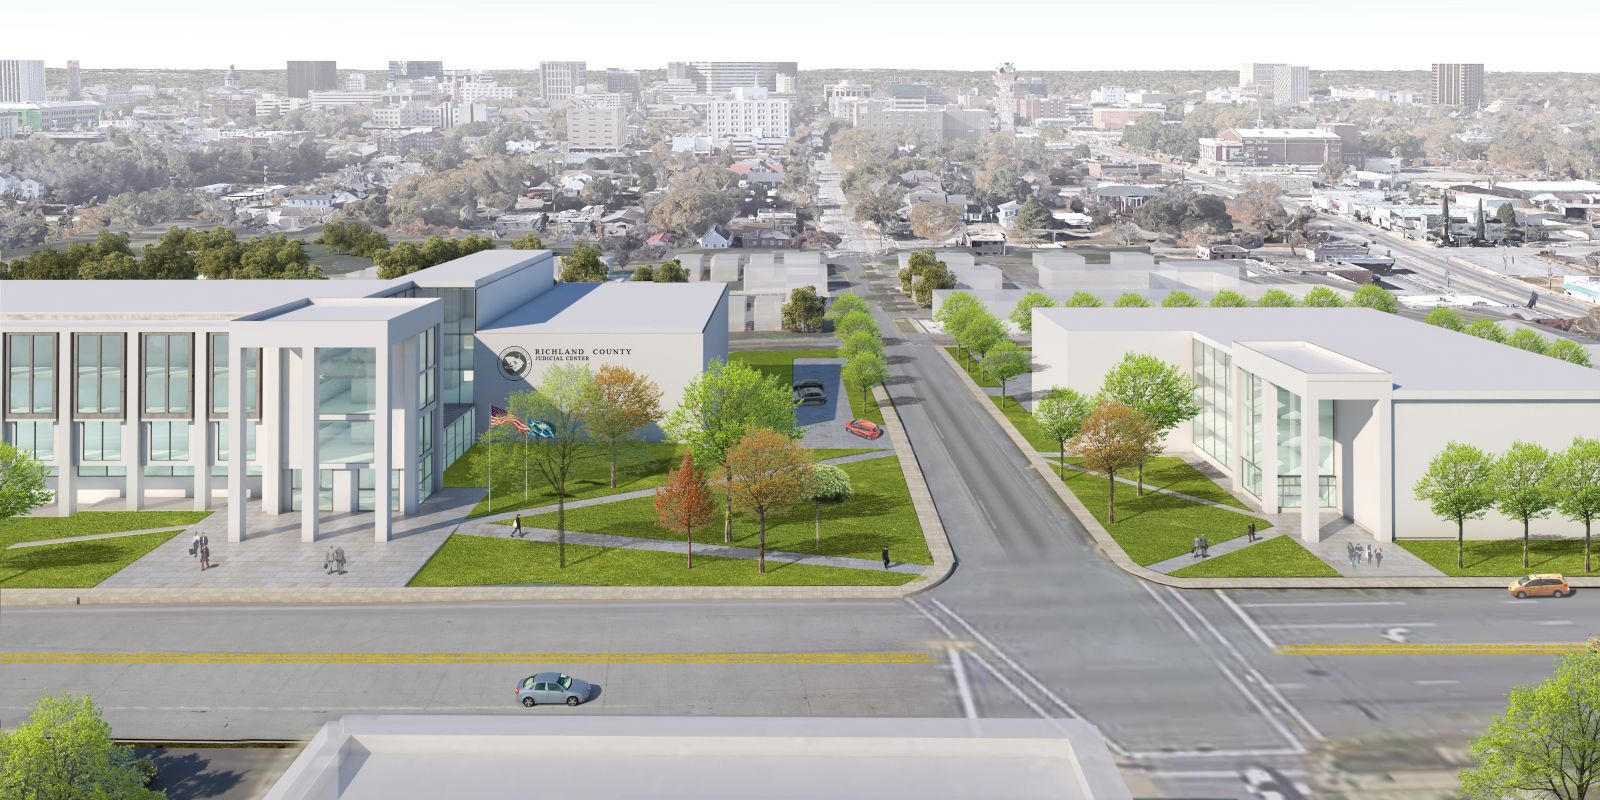 A rendering of the proposed downtown courthouse and judicial complex at 2020 Hampton St., part of the Richland Renaissance project. Richland County Council voted to indefinitely defer the project on Thursday. (Photo/Provided)